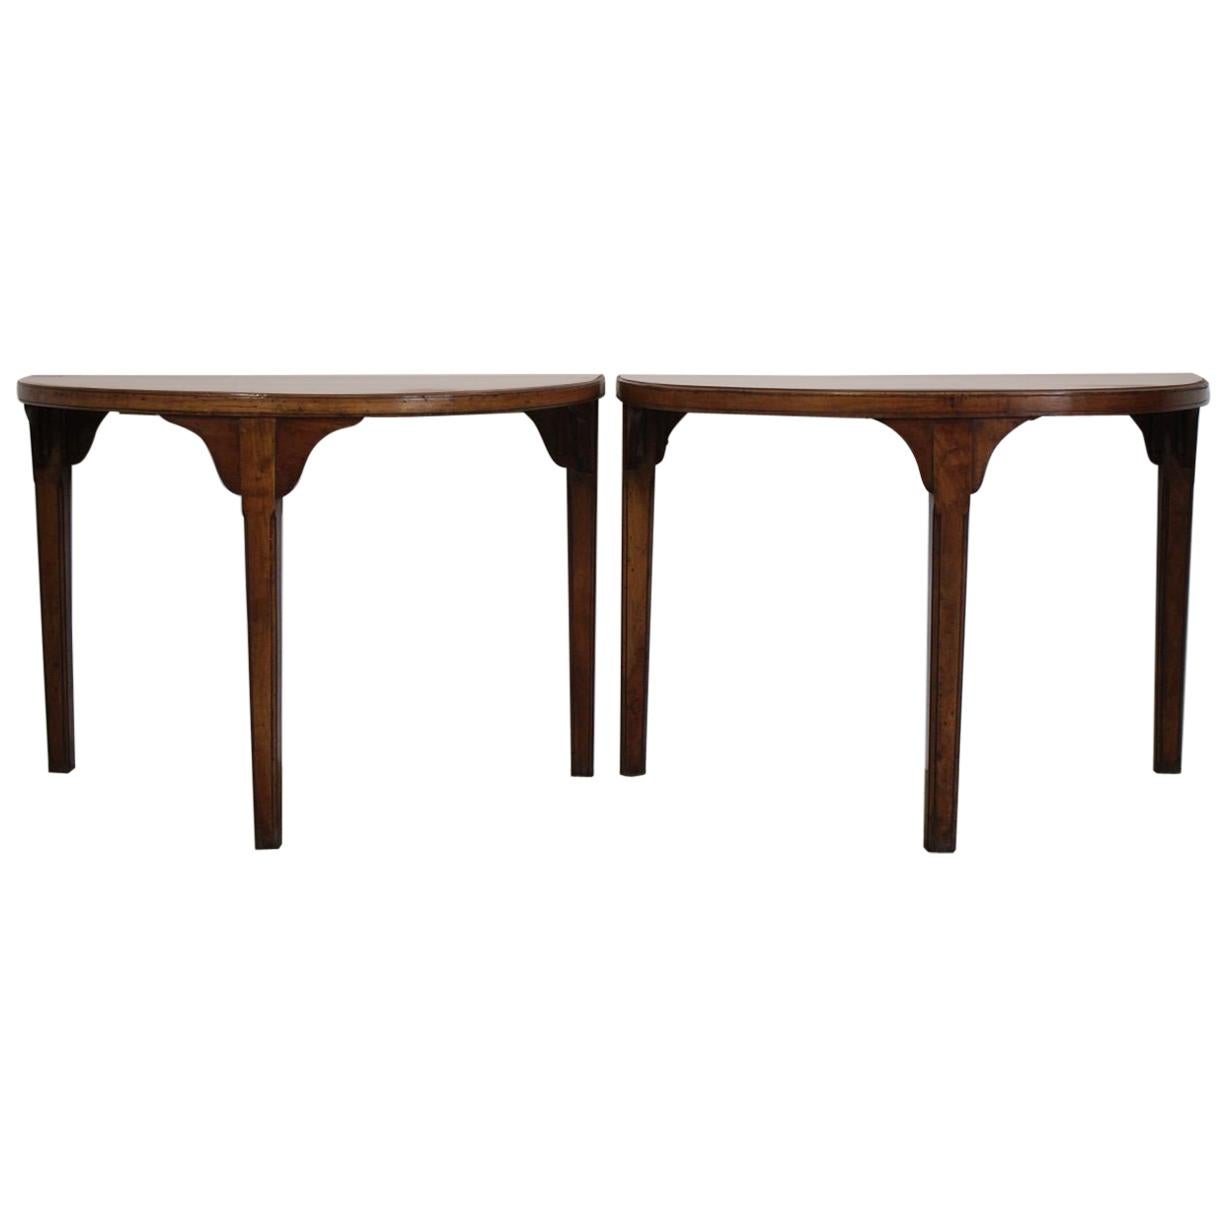 Pair of Early 19th Century French Cherrywood Demilune Tables For Sale